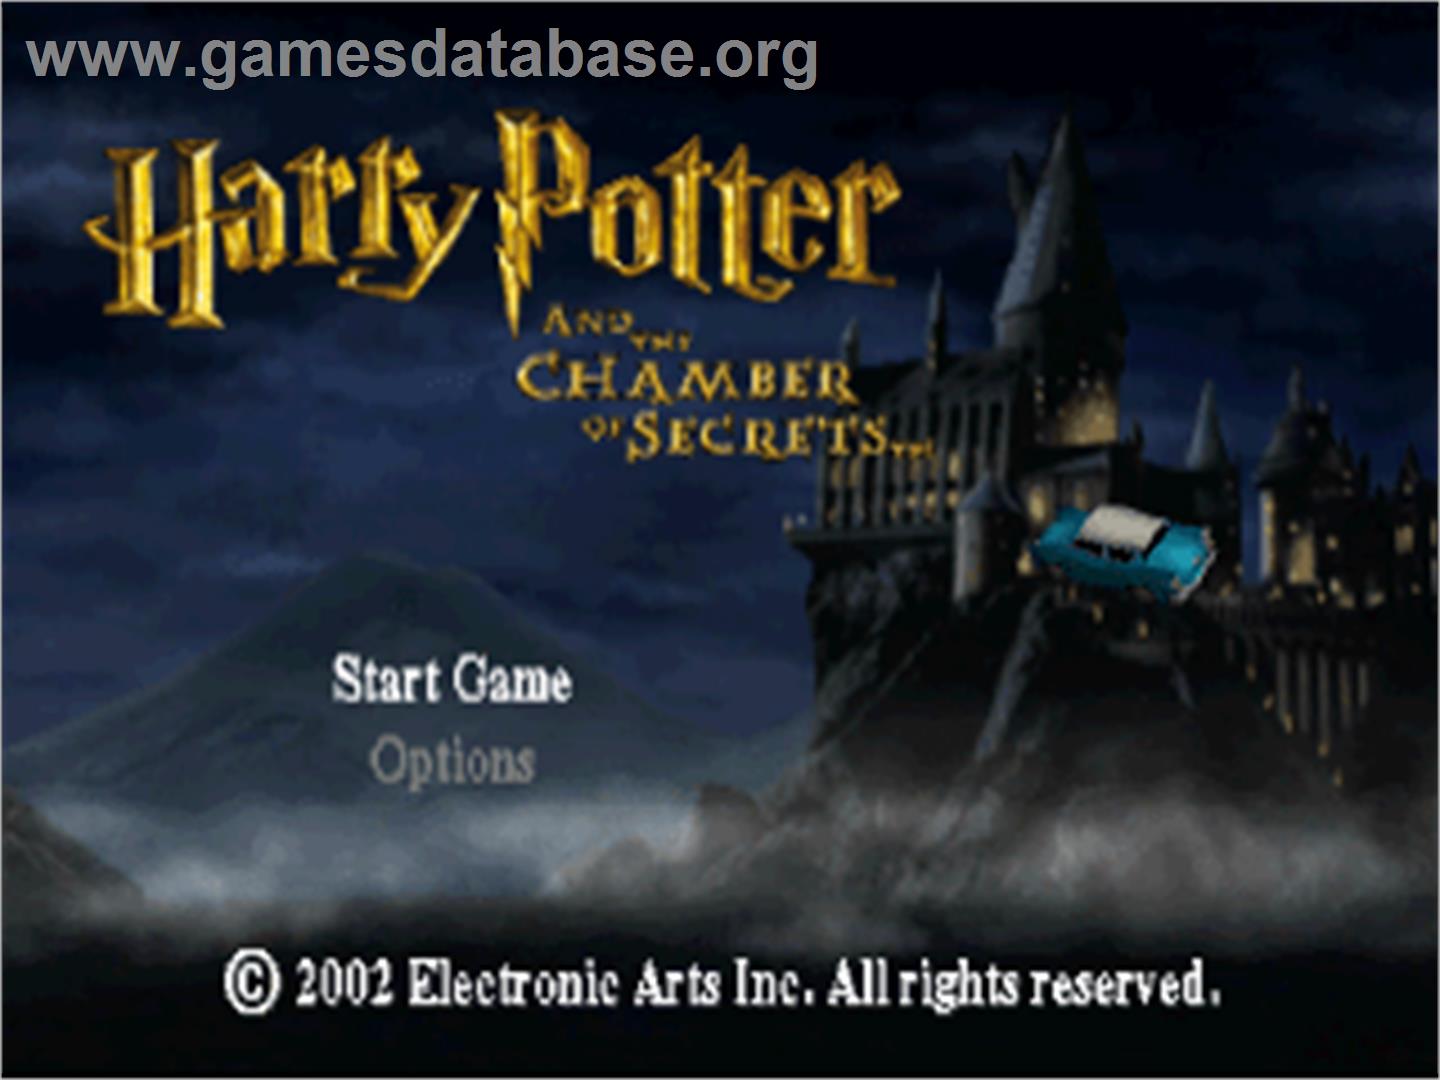 Harry Potter and the Chamber of Secrets - Sony Playstation - Artwork - Title Screen